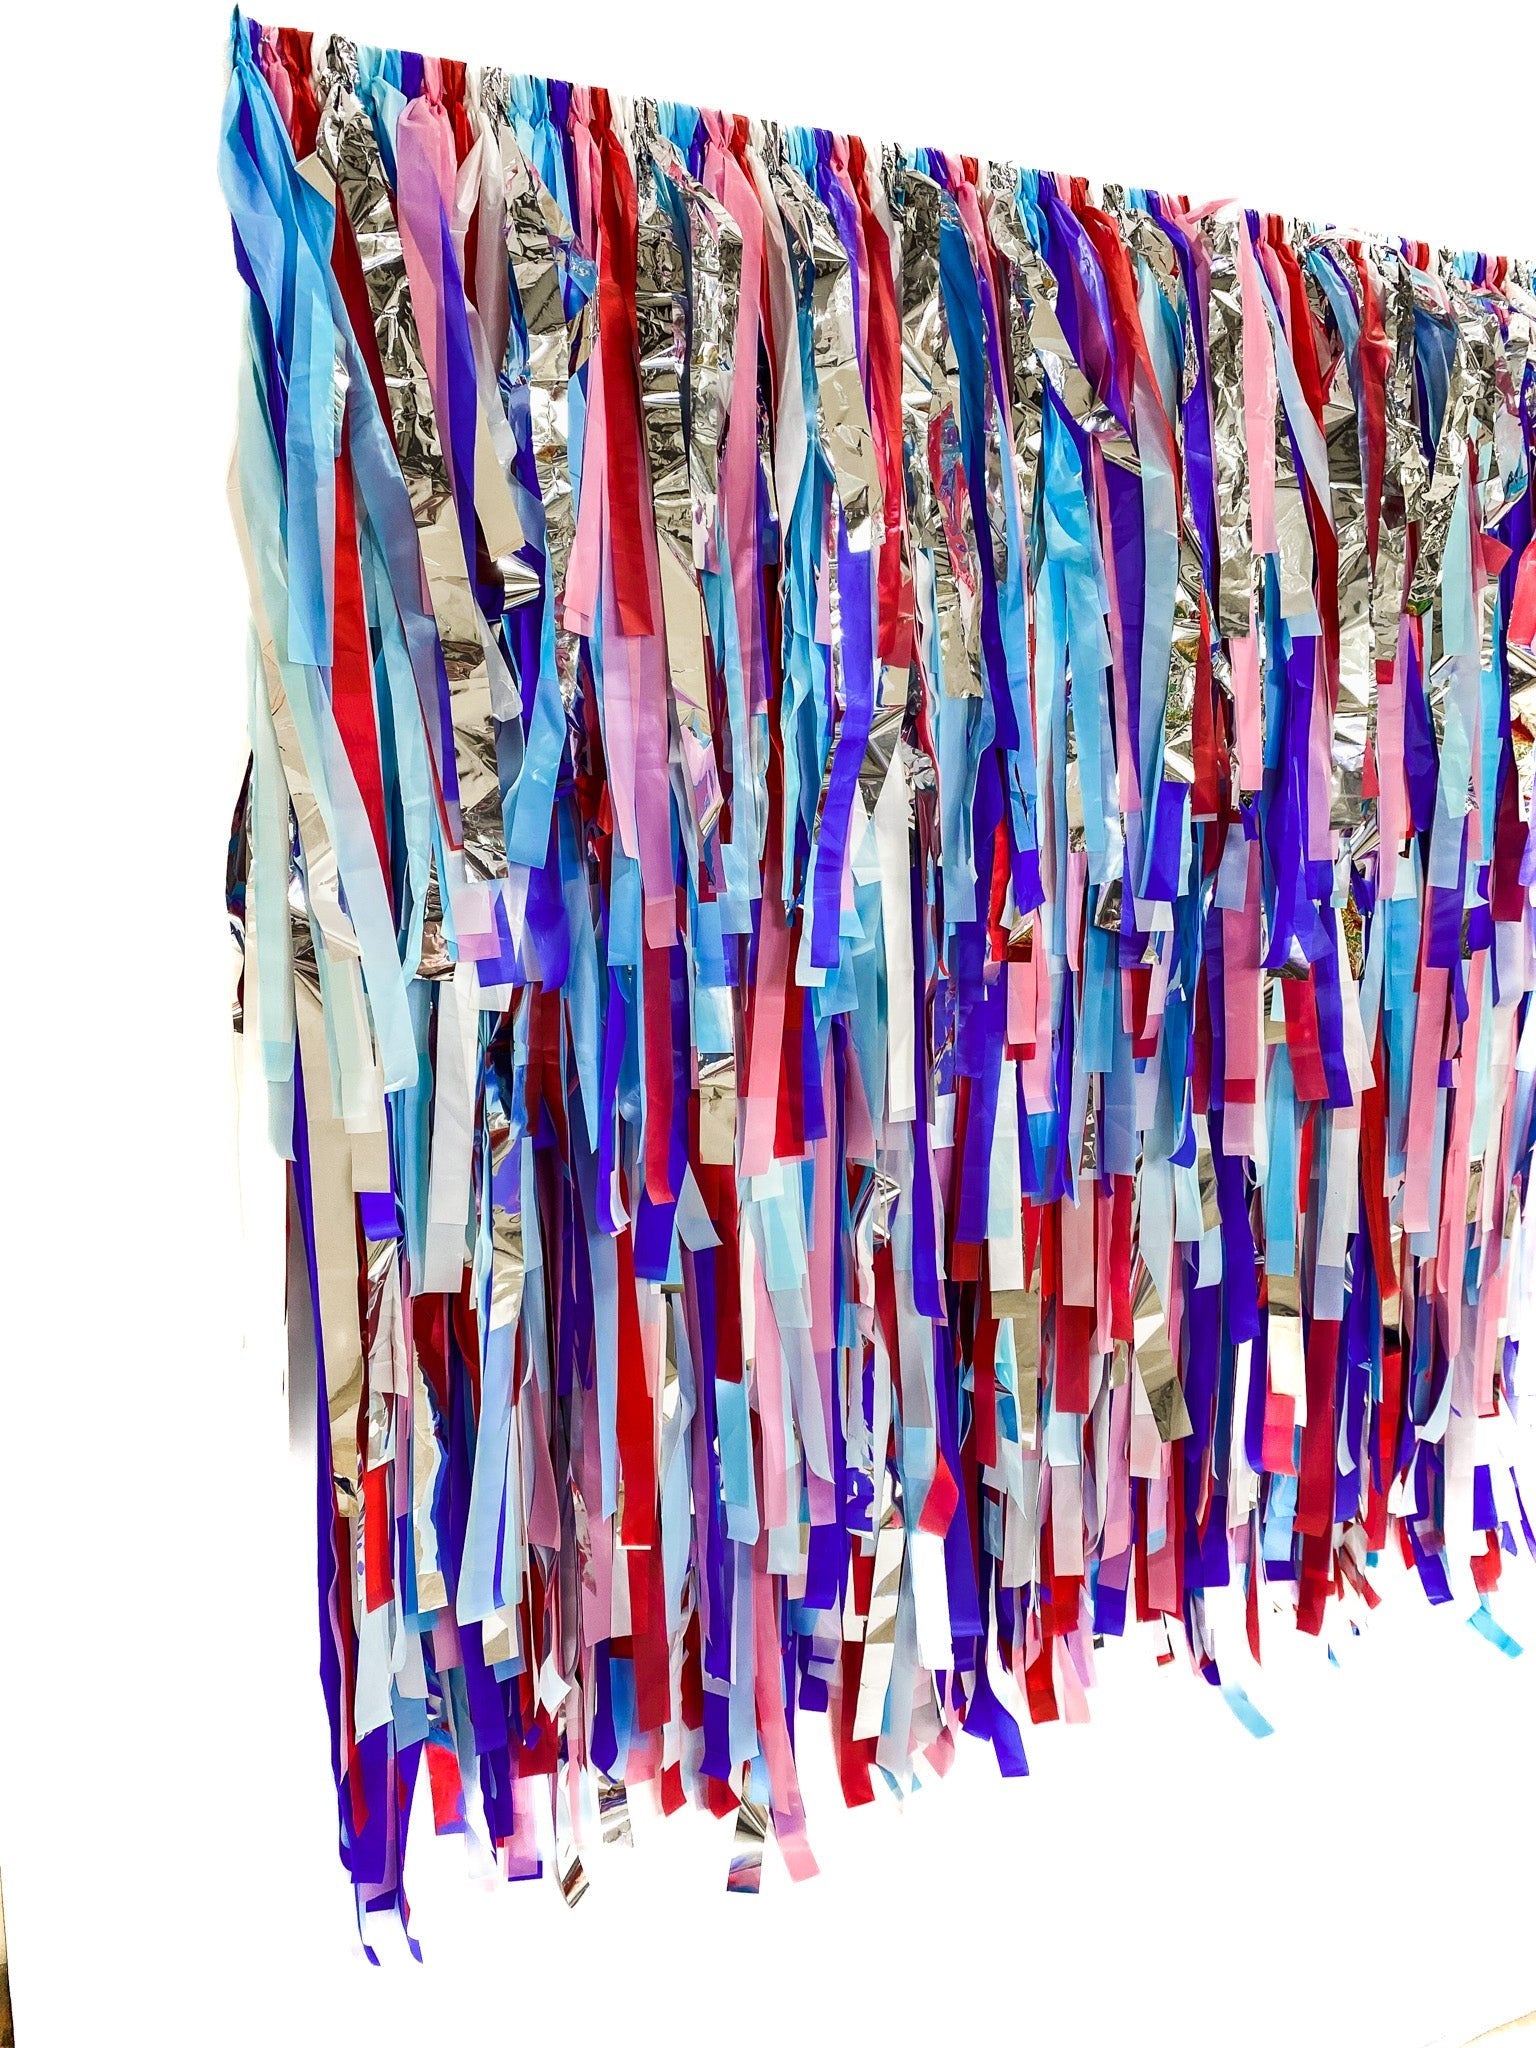 Party In The USA Fringe Backdrop - Oh My Darling Party Co-4th july4th of Julybermuda #Fringe_Backdrop#